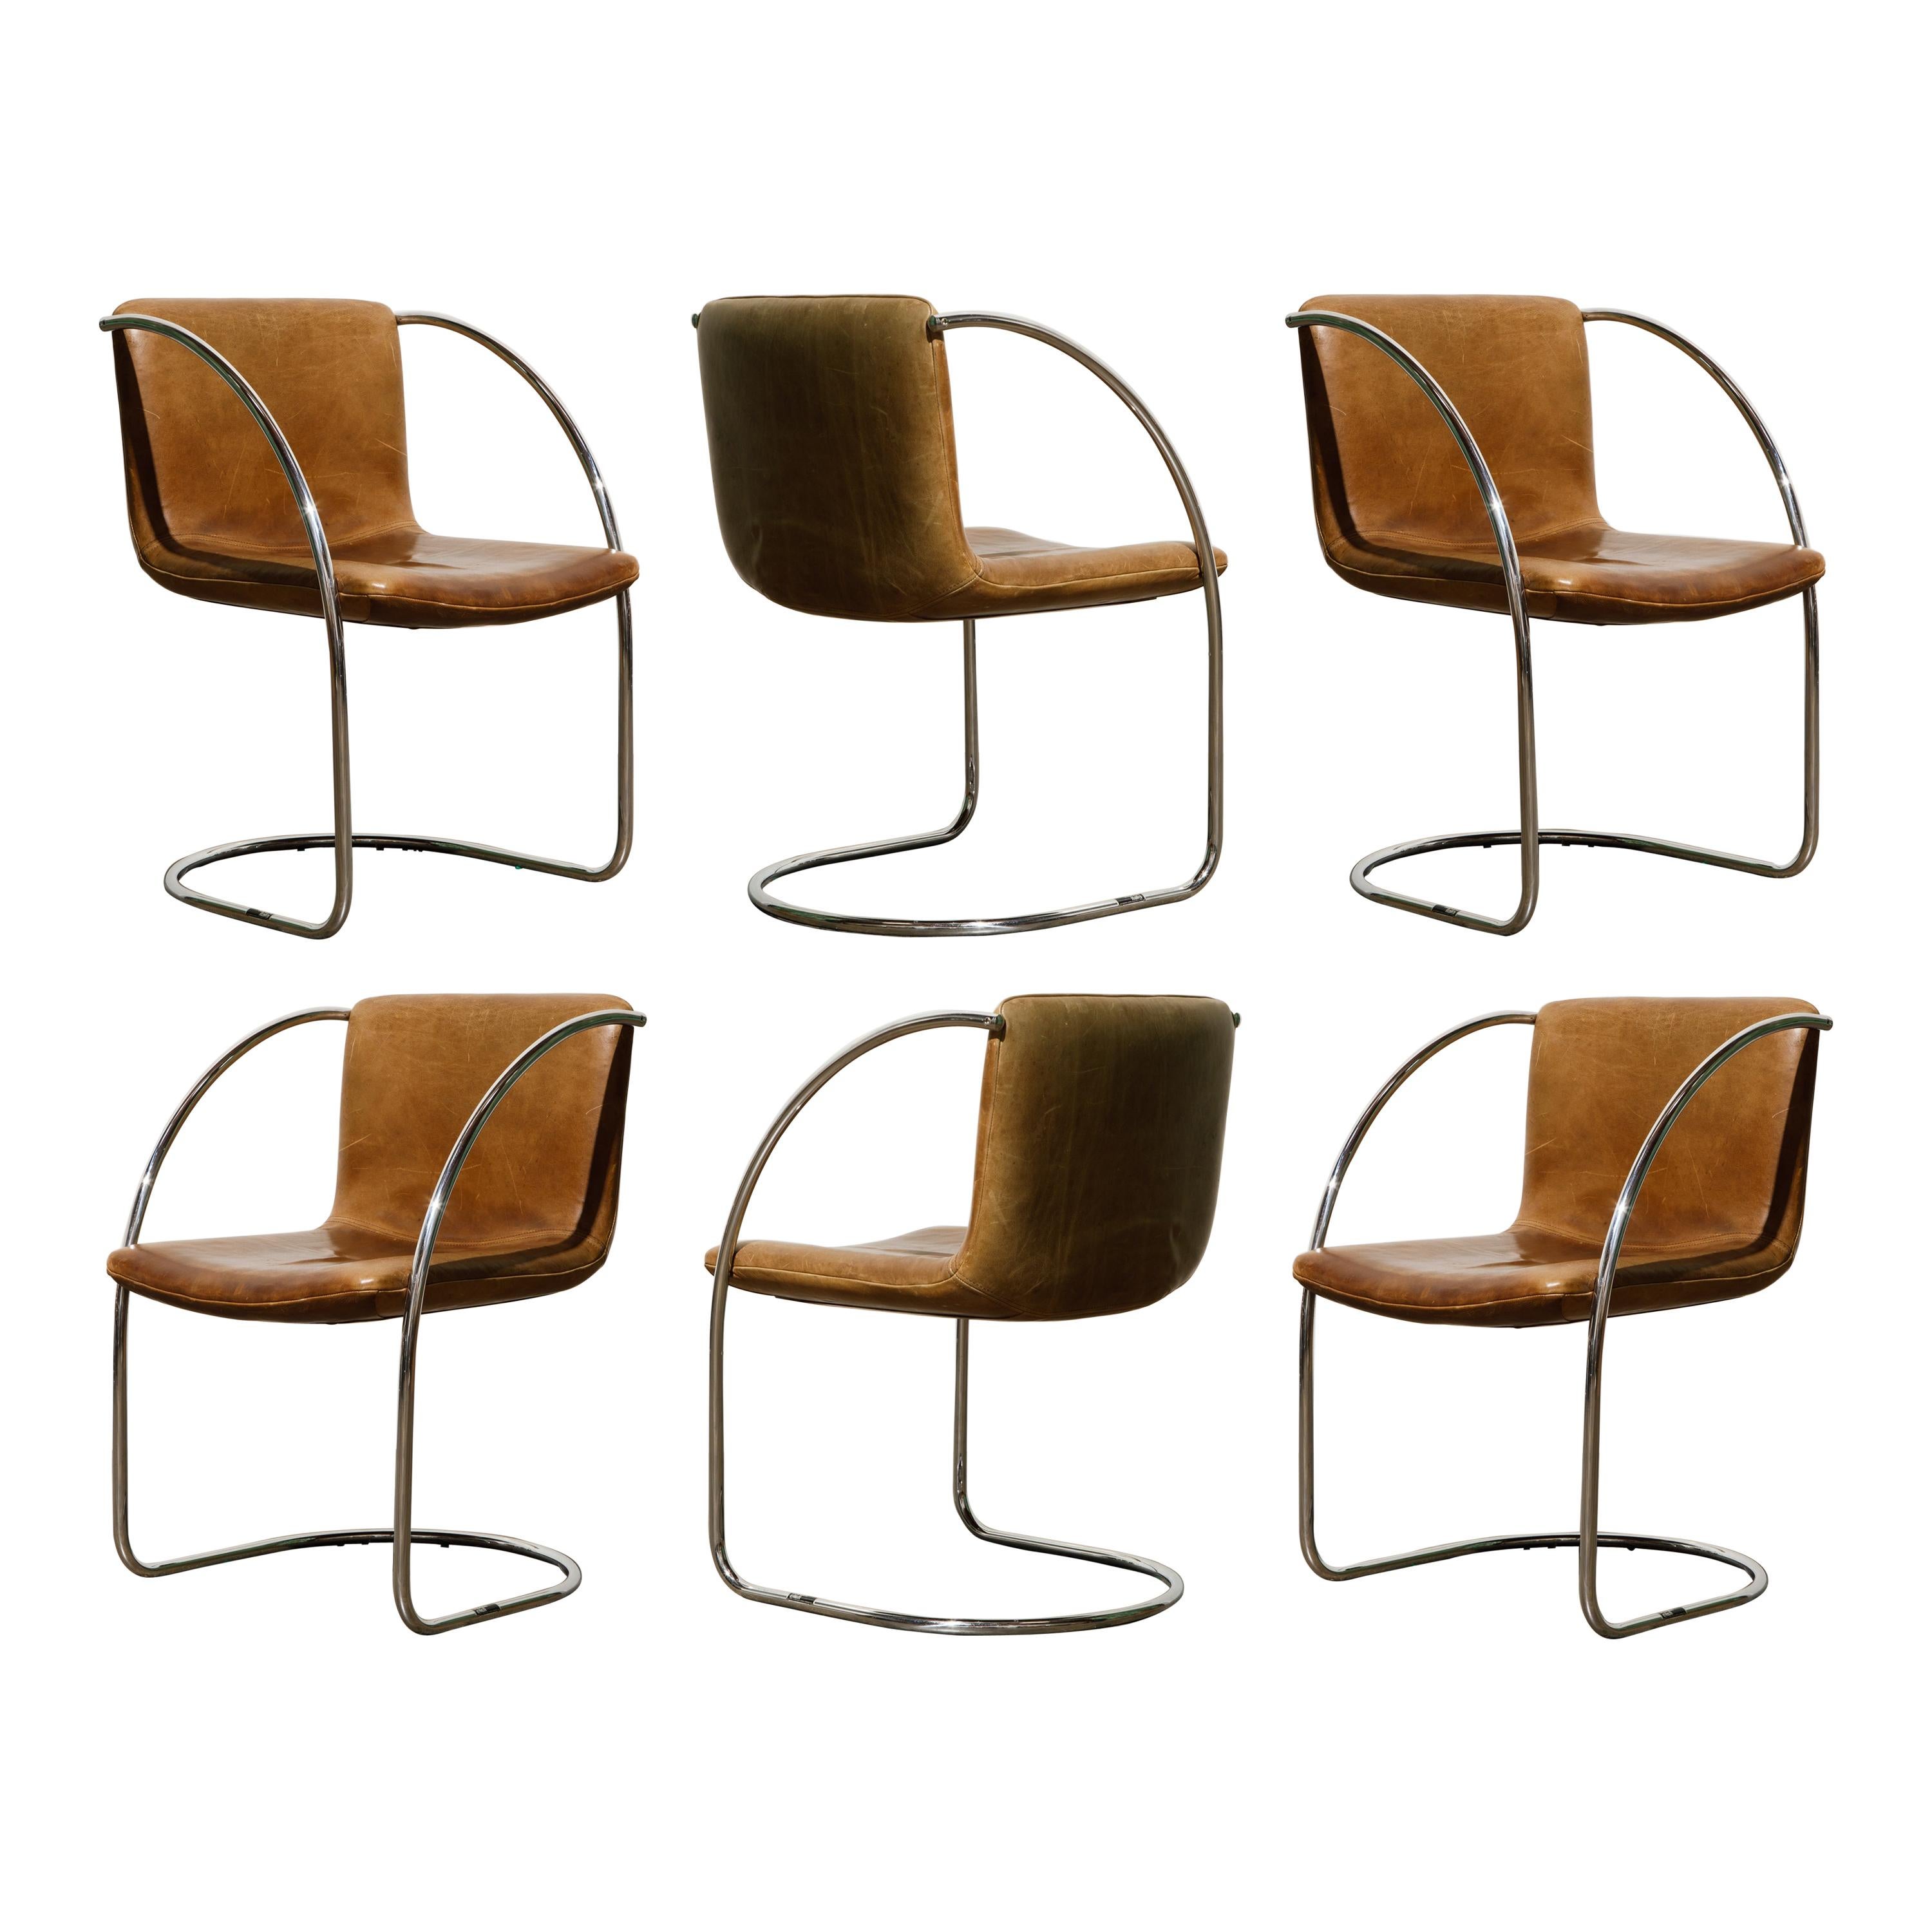 'Lens' Leather Chairs by Giovanni Offredi for Saporiti Italia, c. 1968, Signed